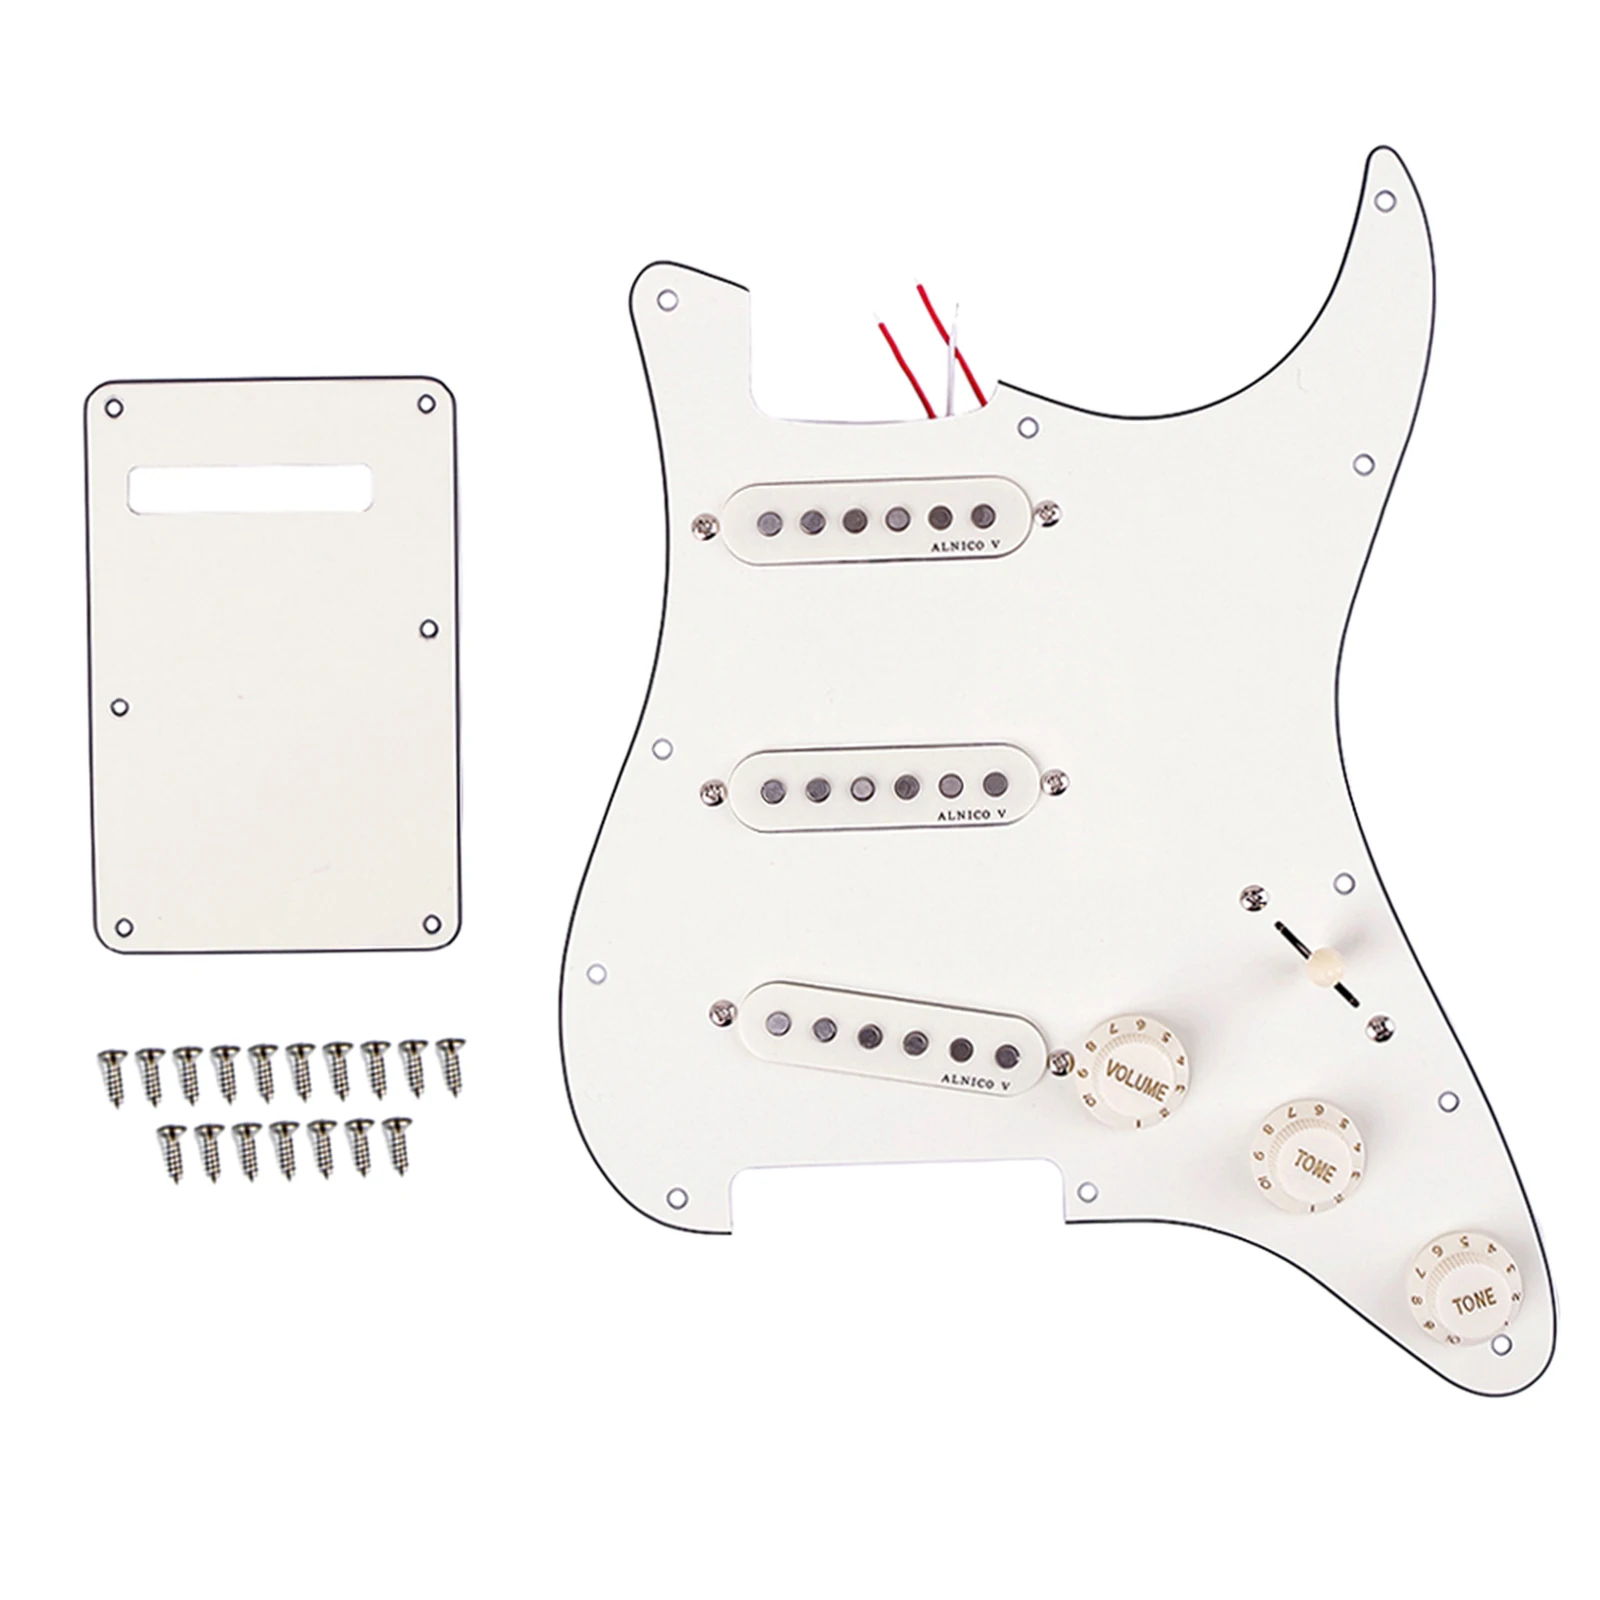 

guitar parts Prewired-Loaded SSS Pickguard Alnico V Pickups for guitar accessories with mounting screws